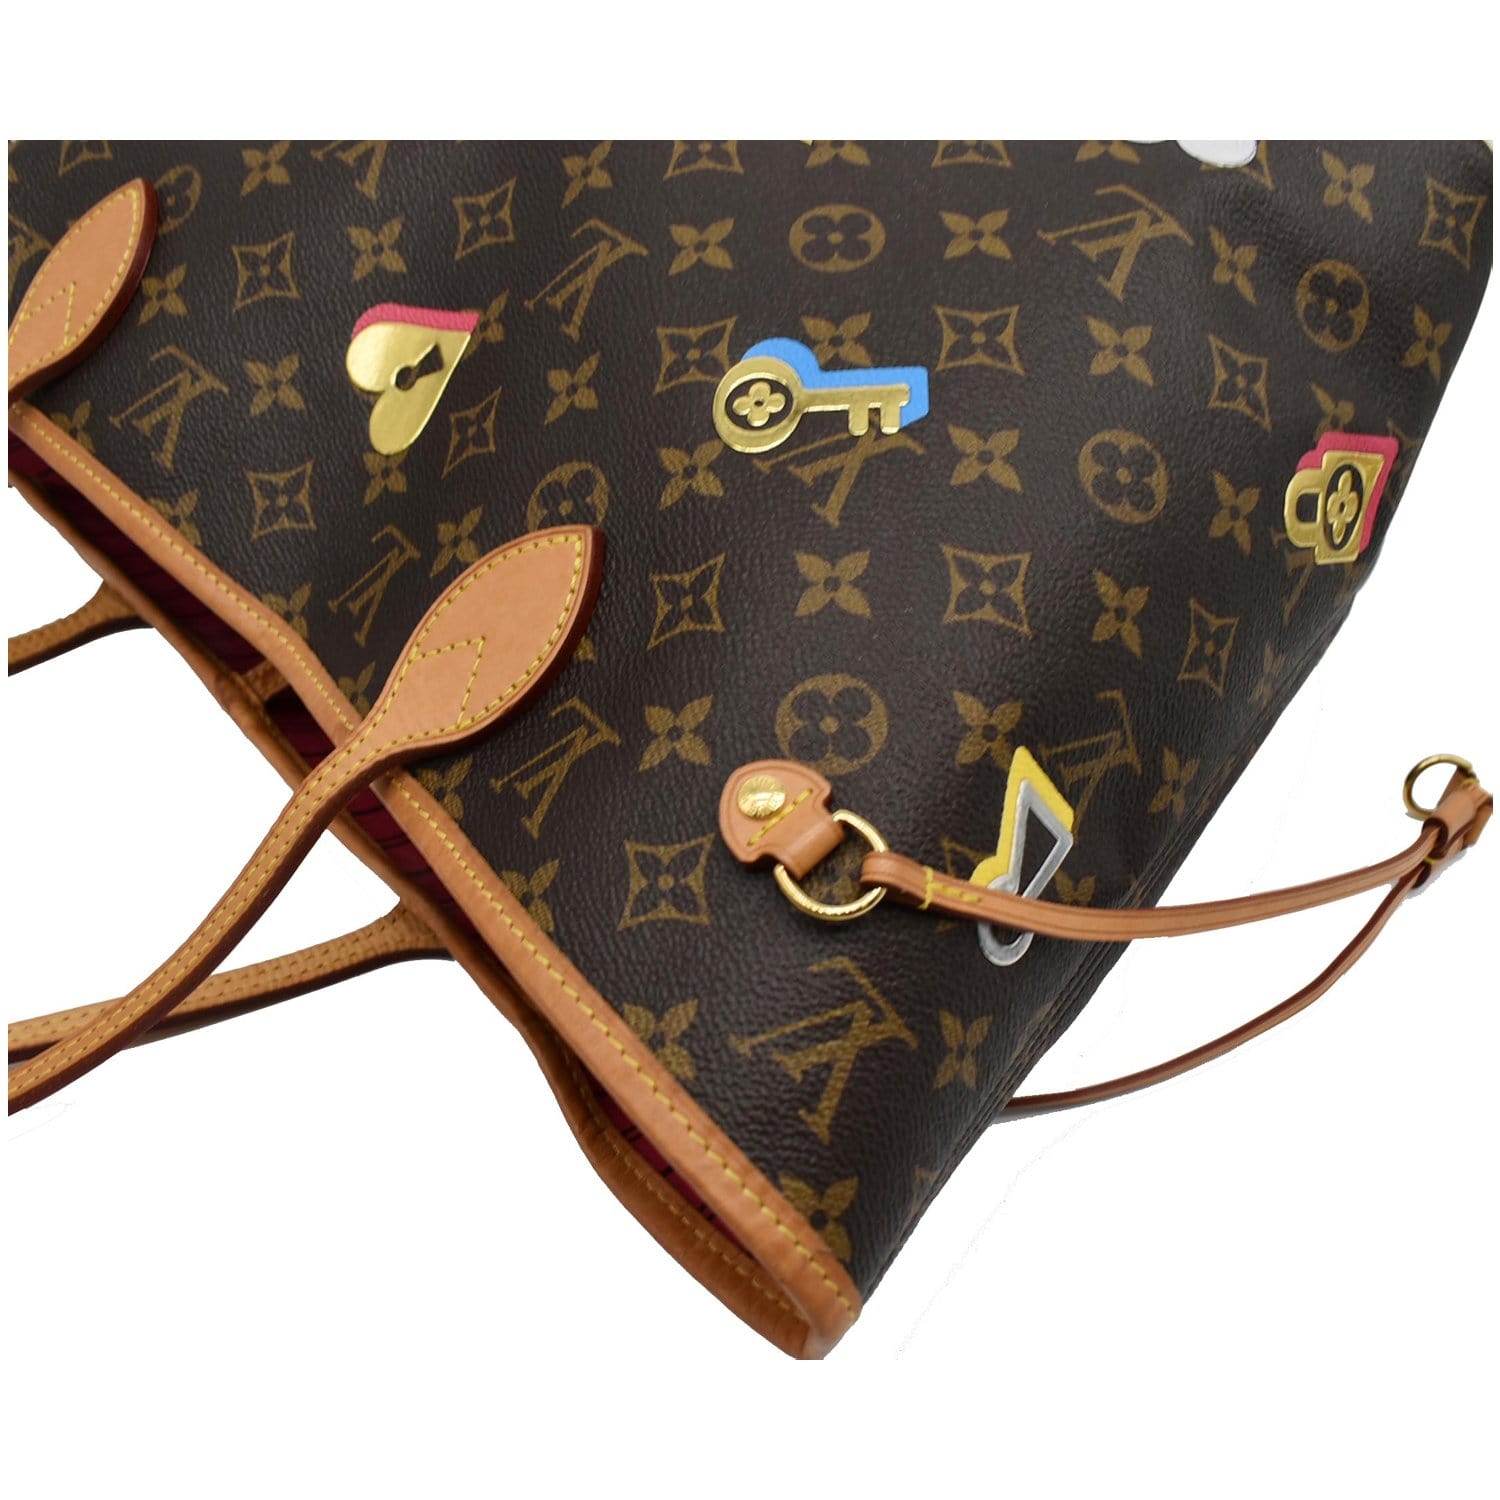 LV Neverfull MM Monogram Canvas With Leather And Gold Hardware Bag #OYRS-1  – Luxuy Vintage